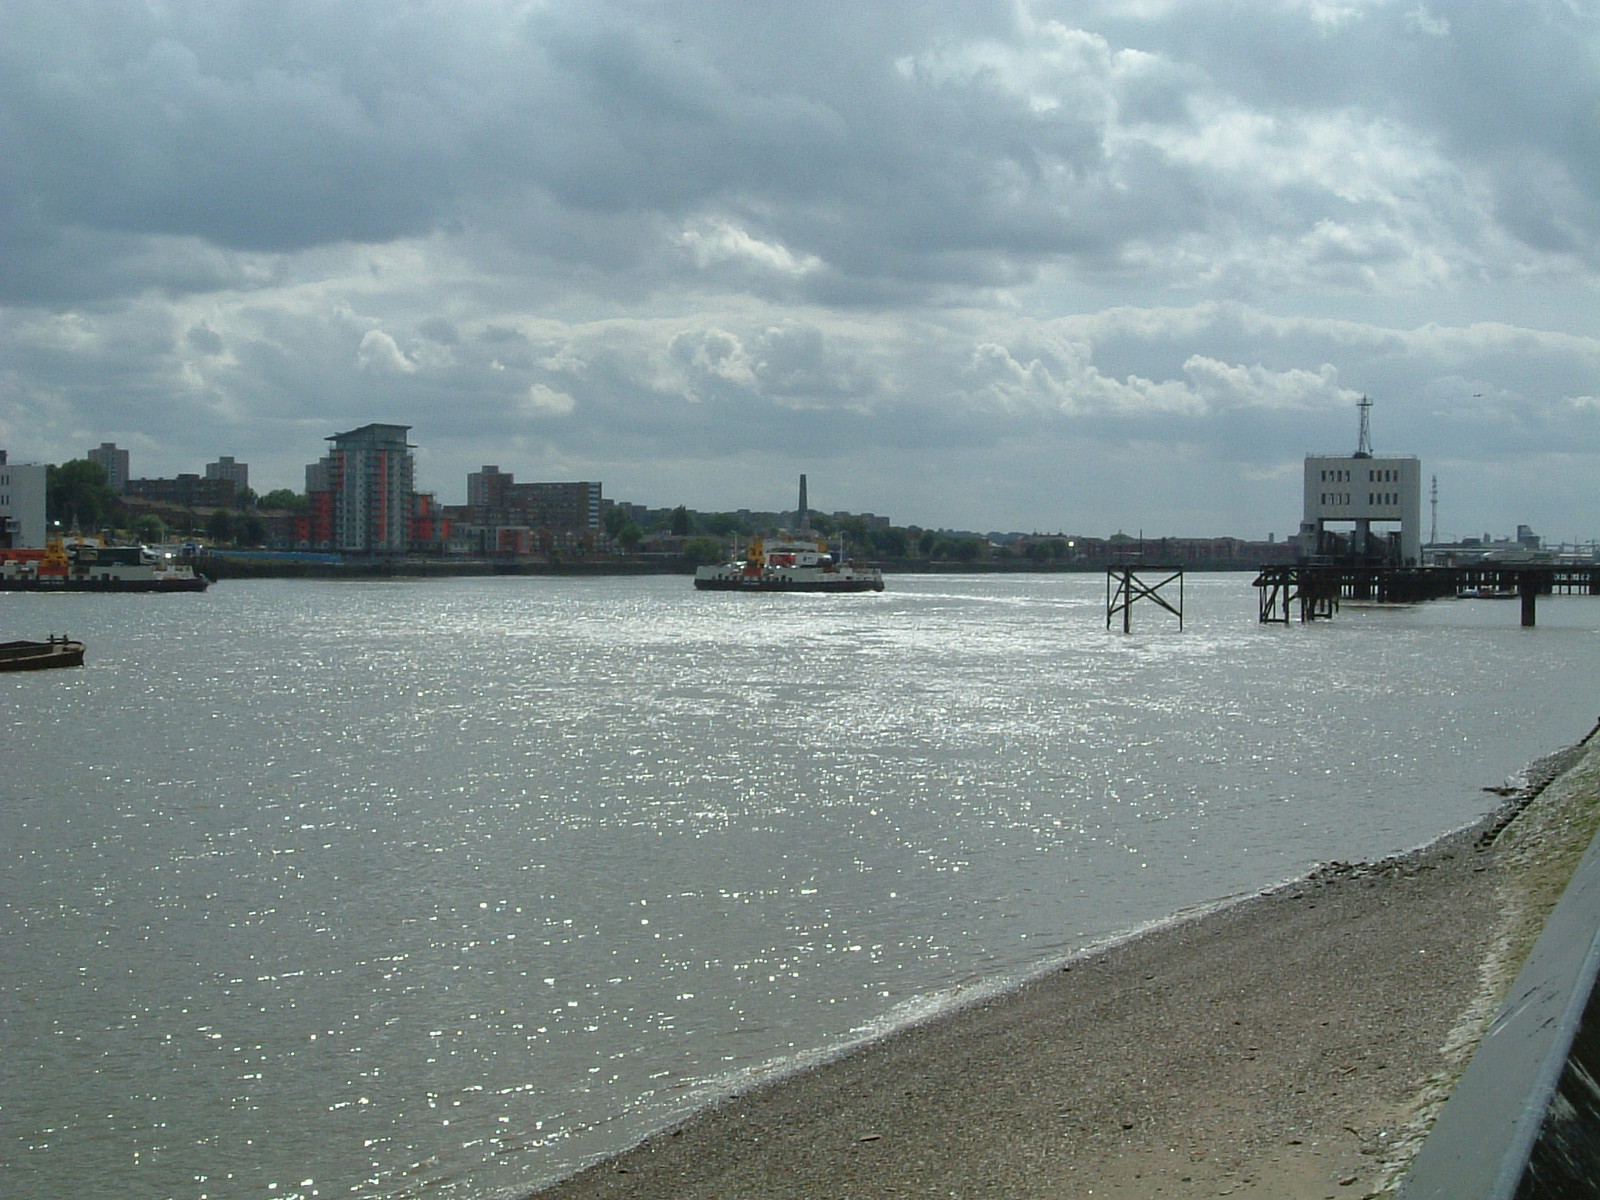 The ferry crossing at Woolwich